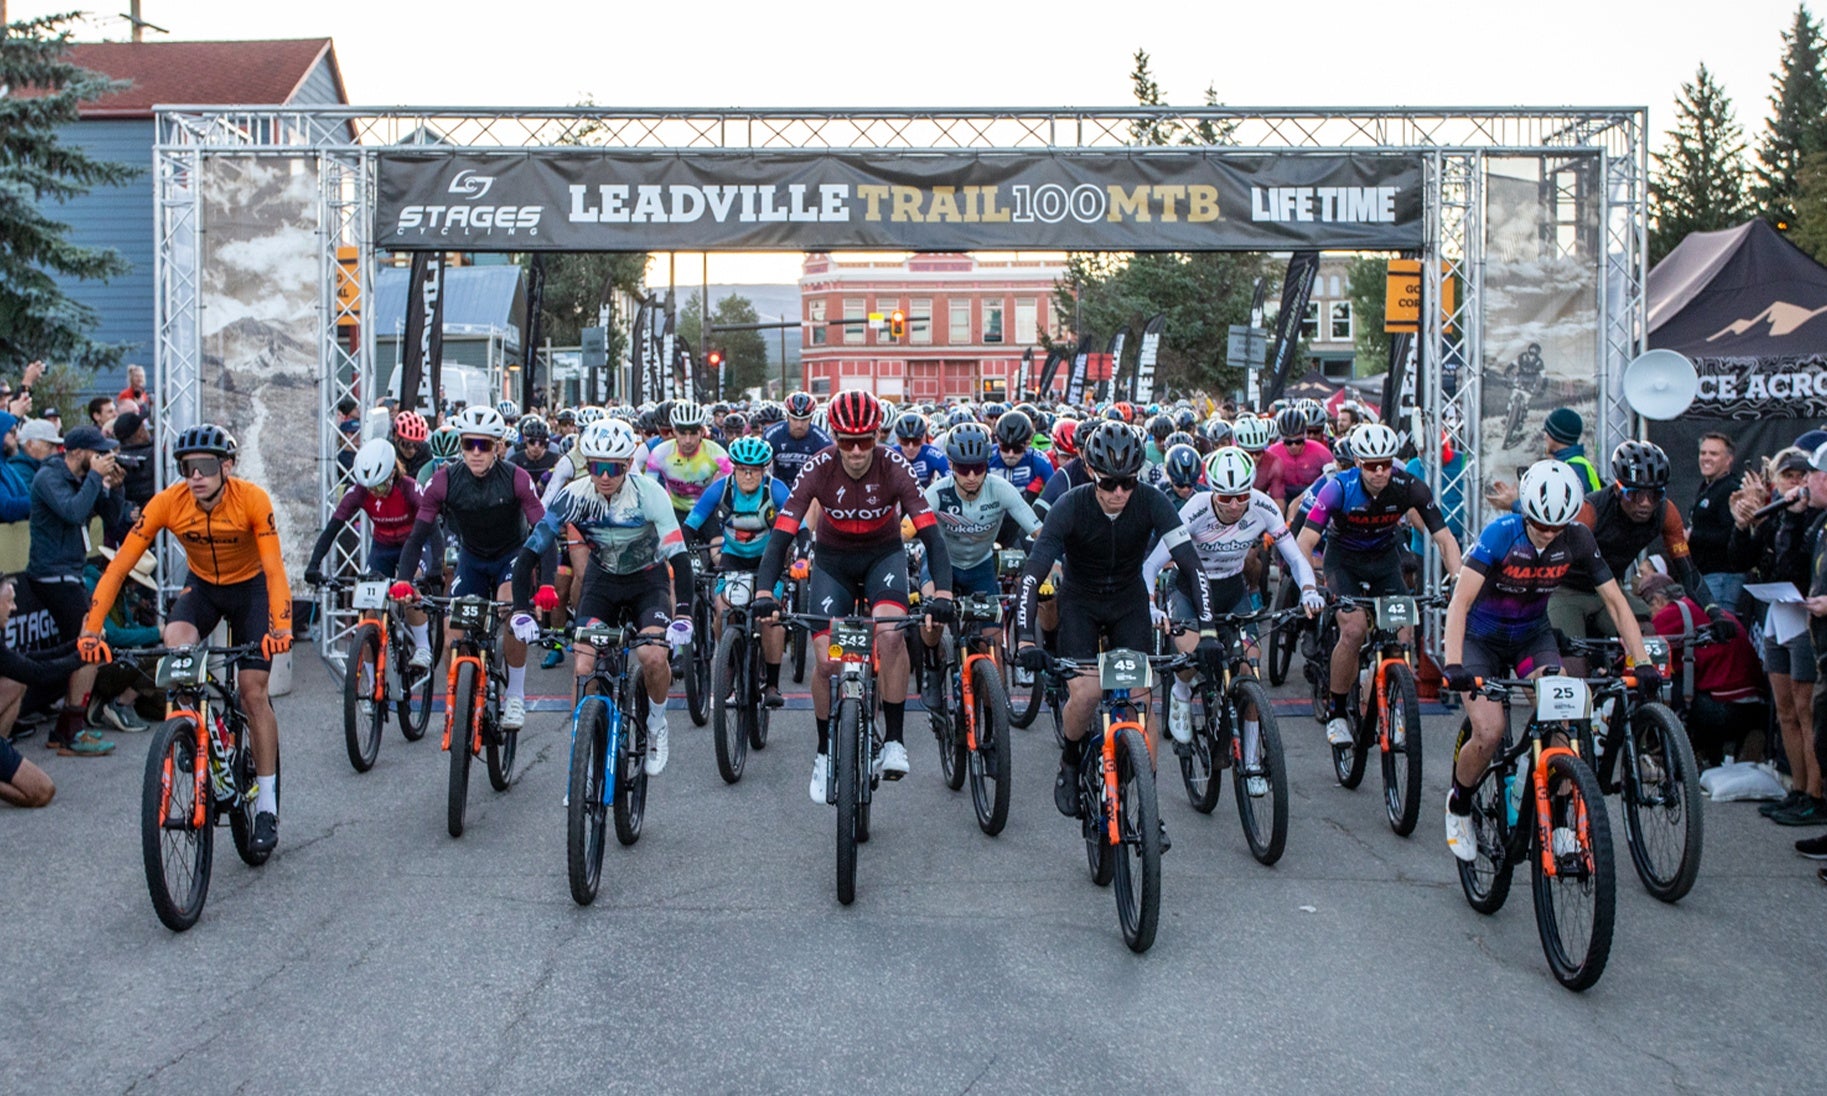 Race Tips from Leadville Trail 100 MTB Finishers